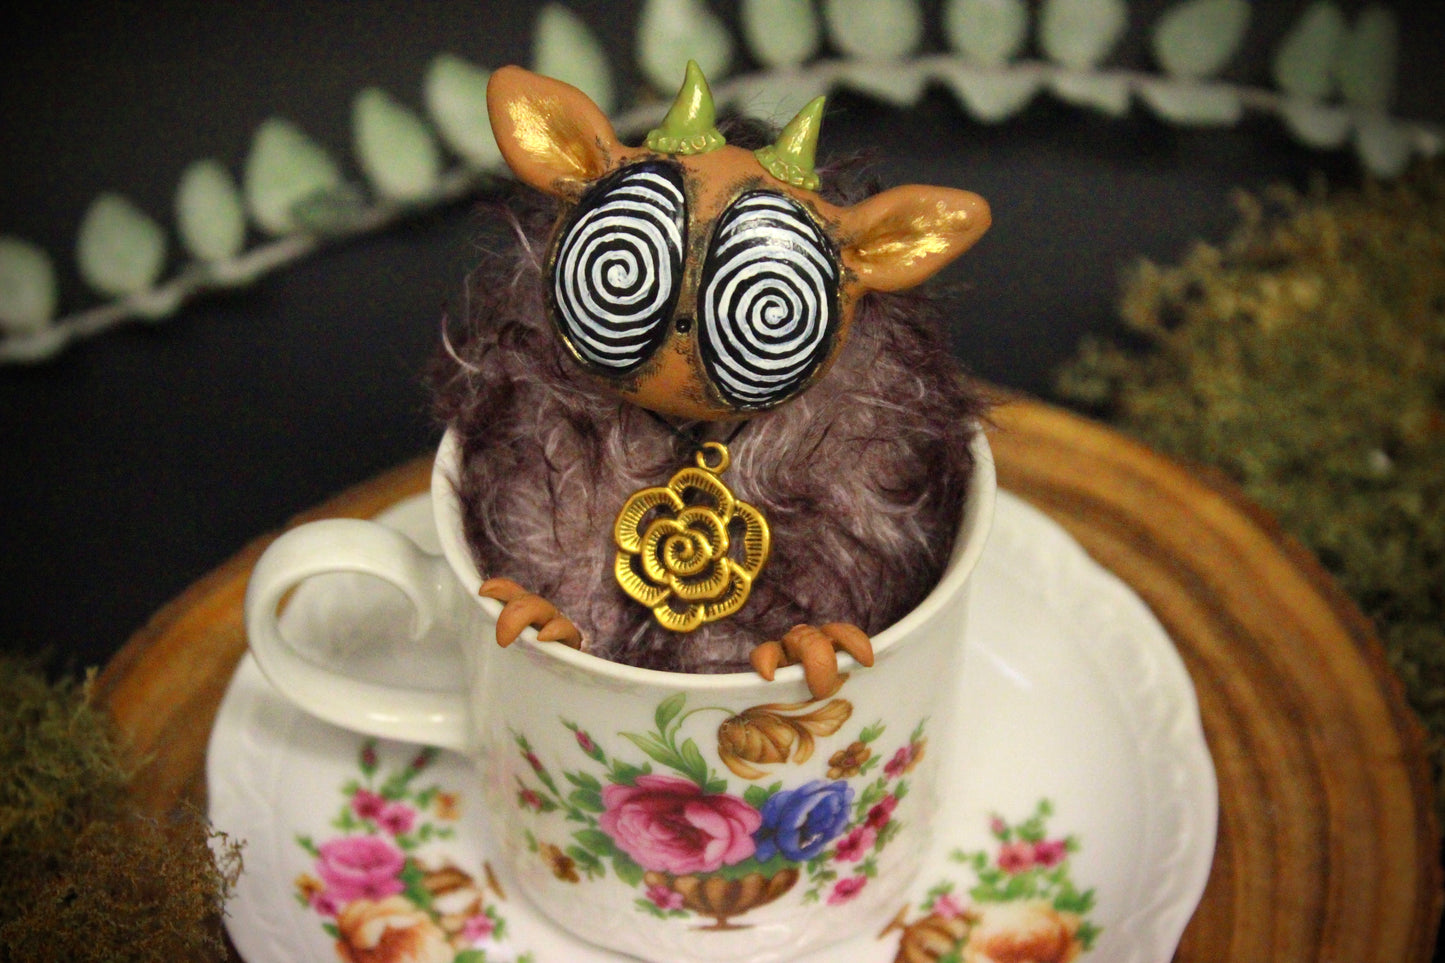 Marigold the Teacup Critter